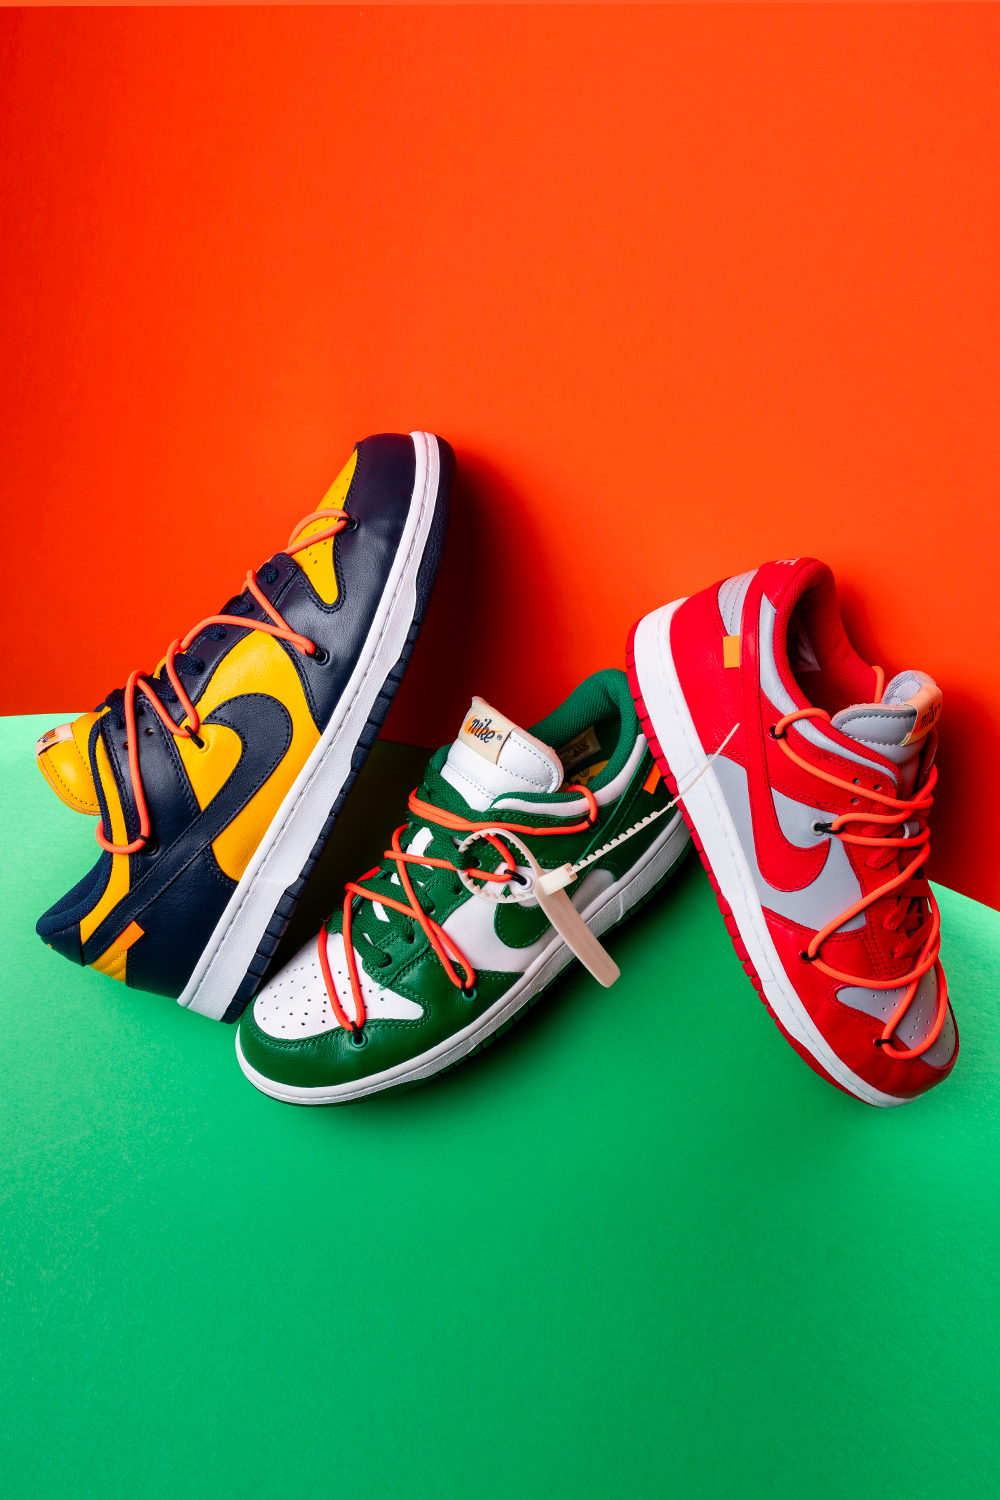 Nike Dunk Wallpapers